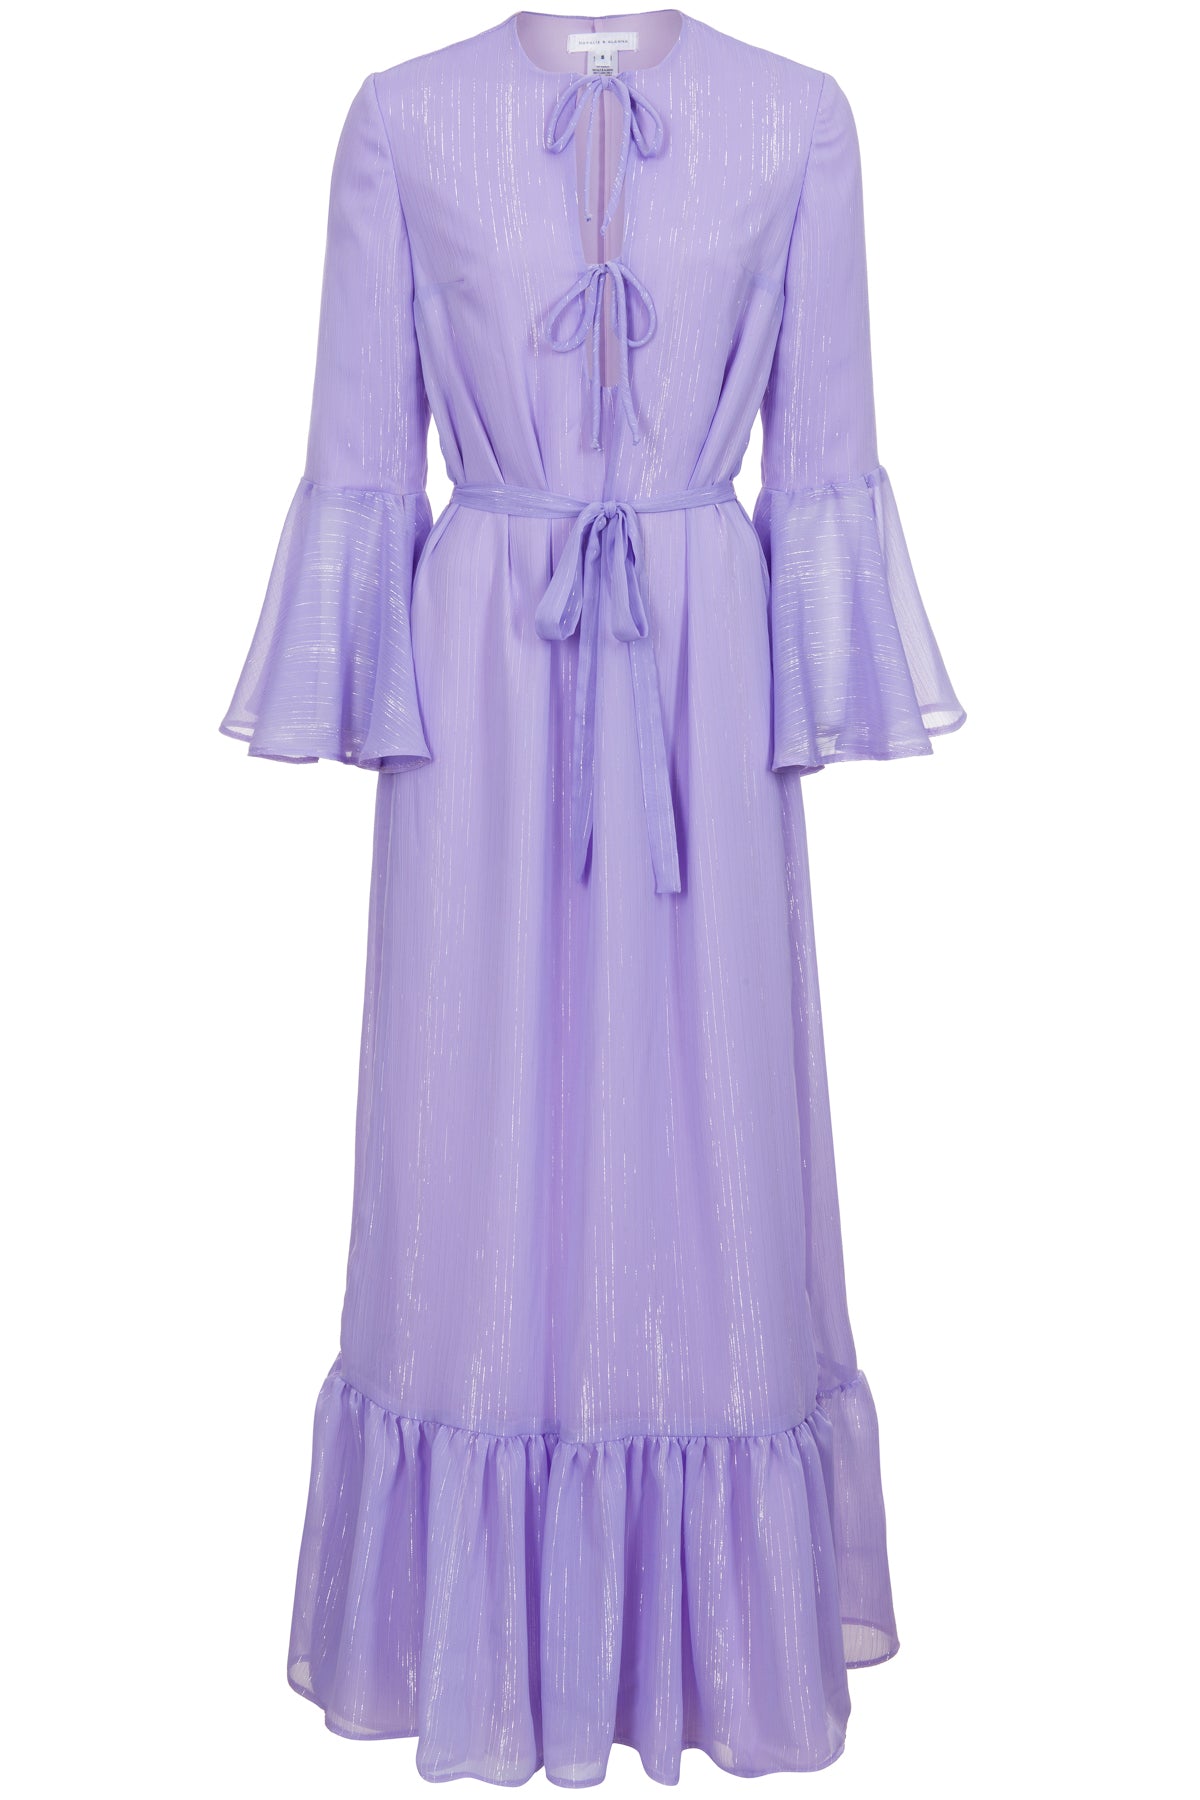 Delphine Lilac Metallic Georgette Maxi Dress- Made to Order